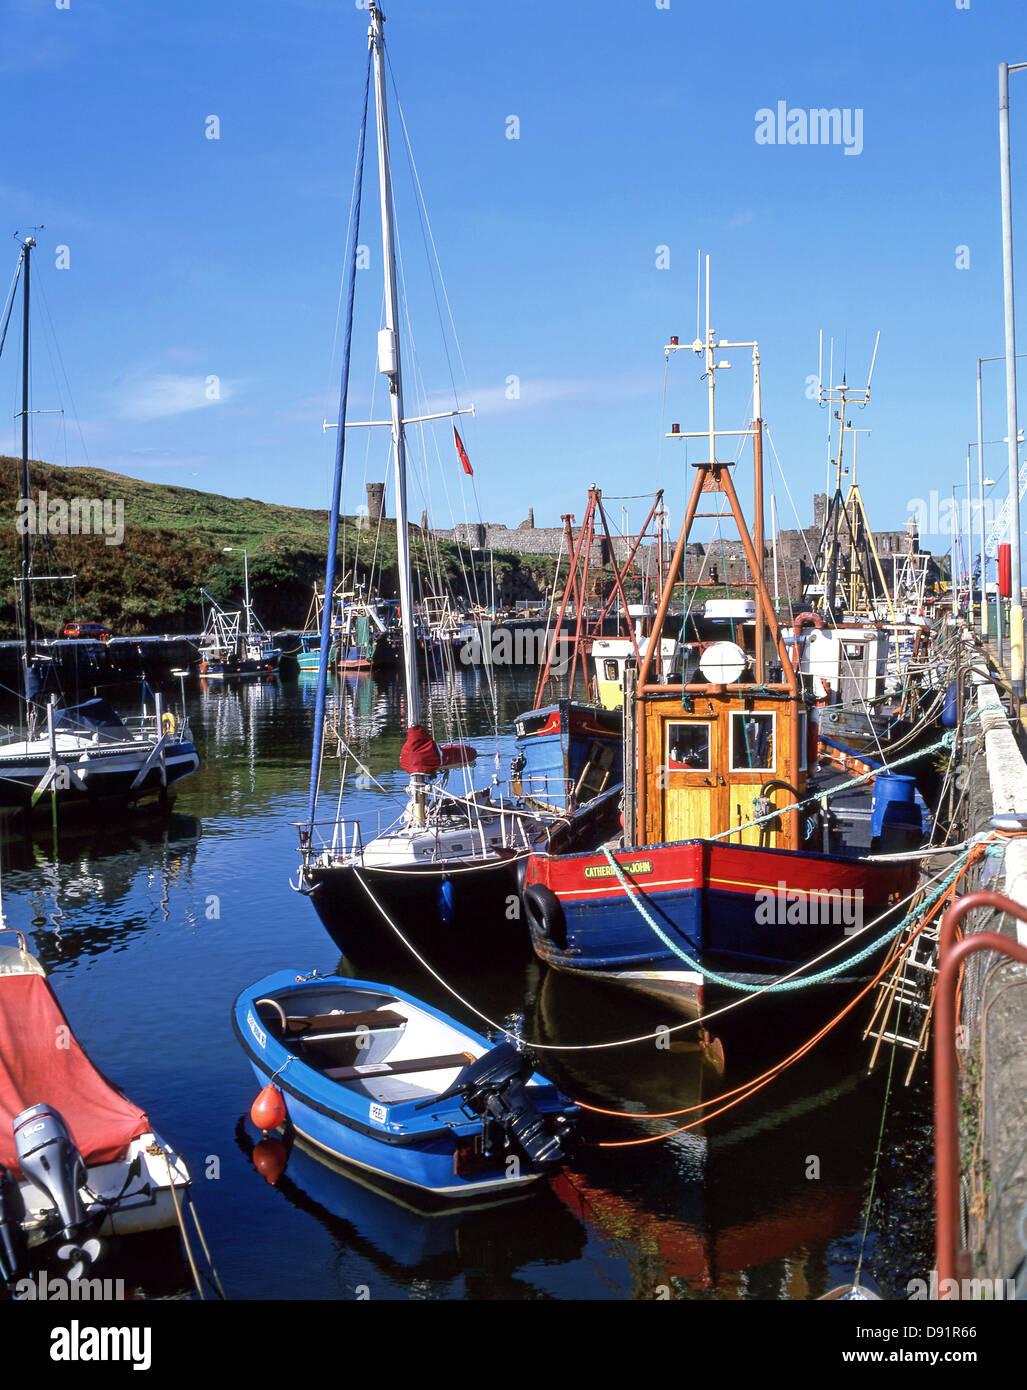 Wooden fishing boats in harbour, Port Erin, Isle of Man Stock Photo